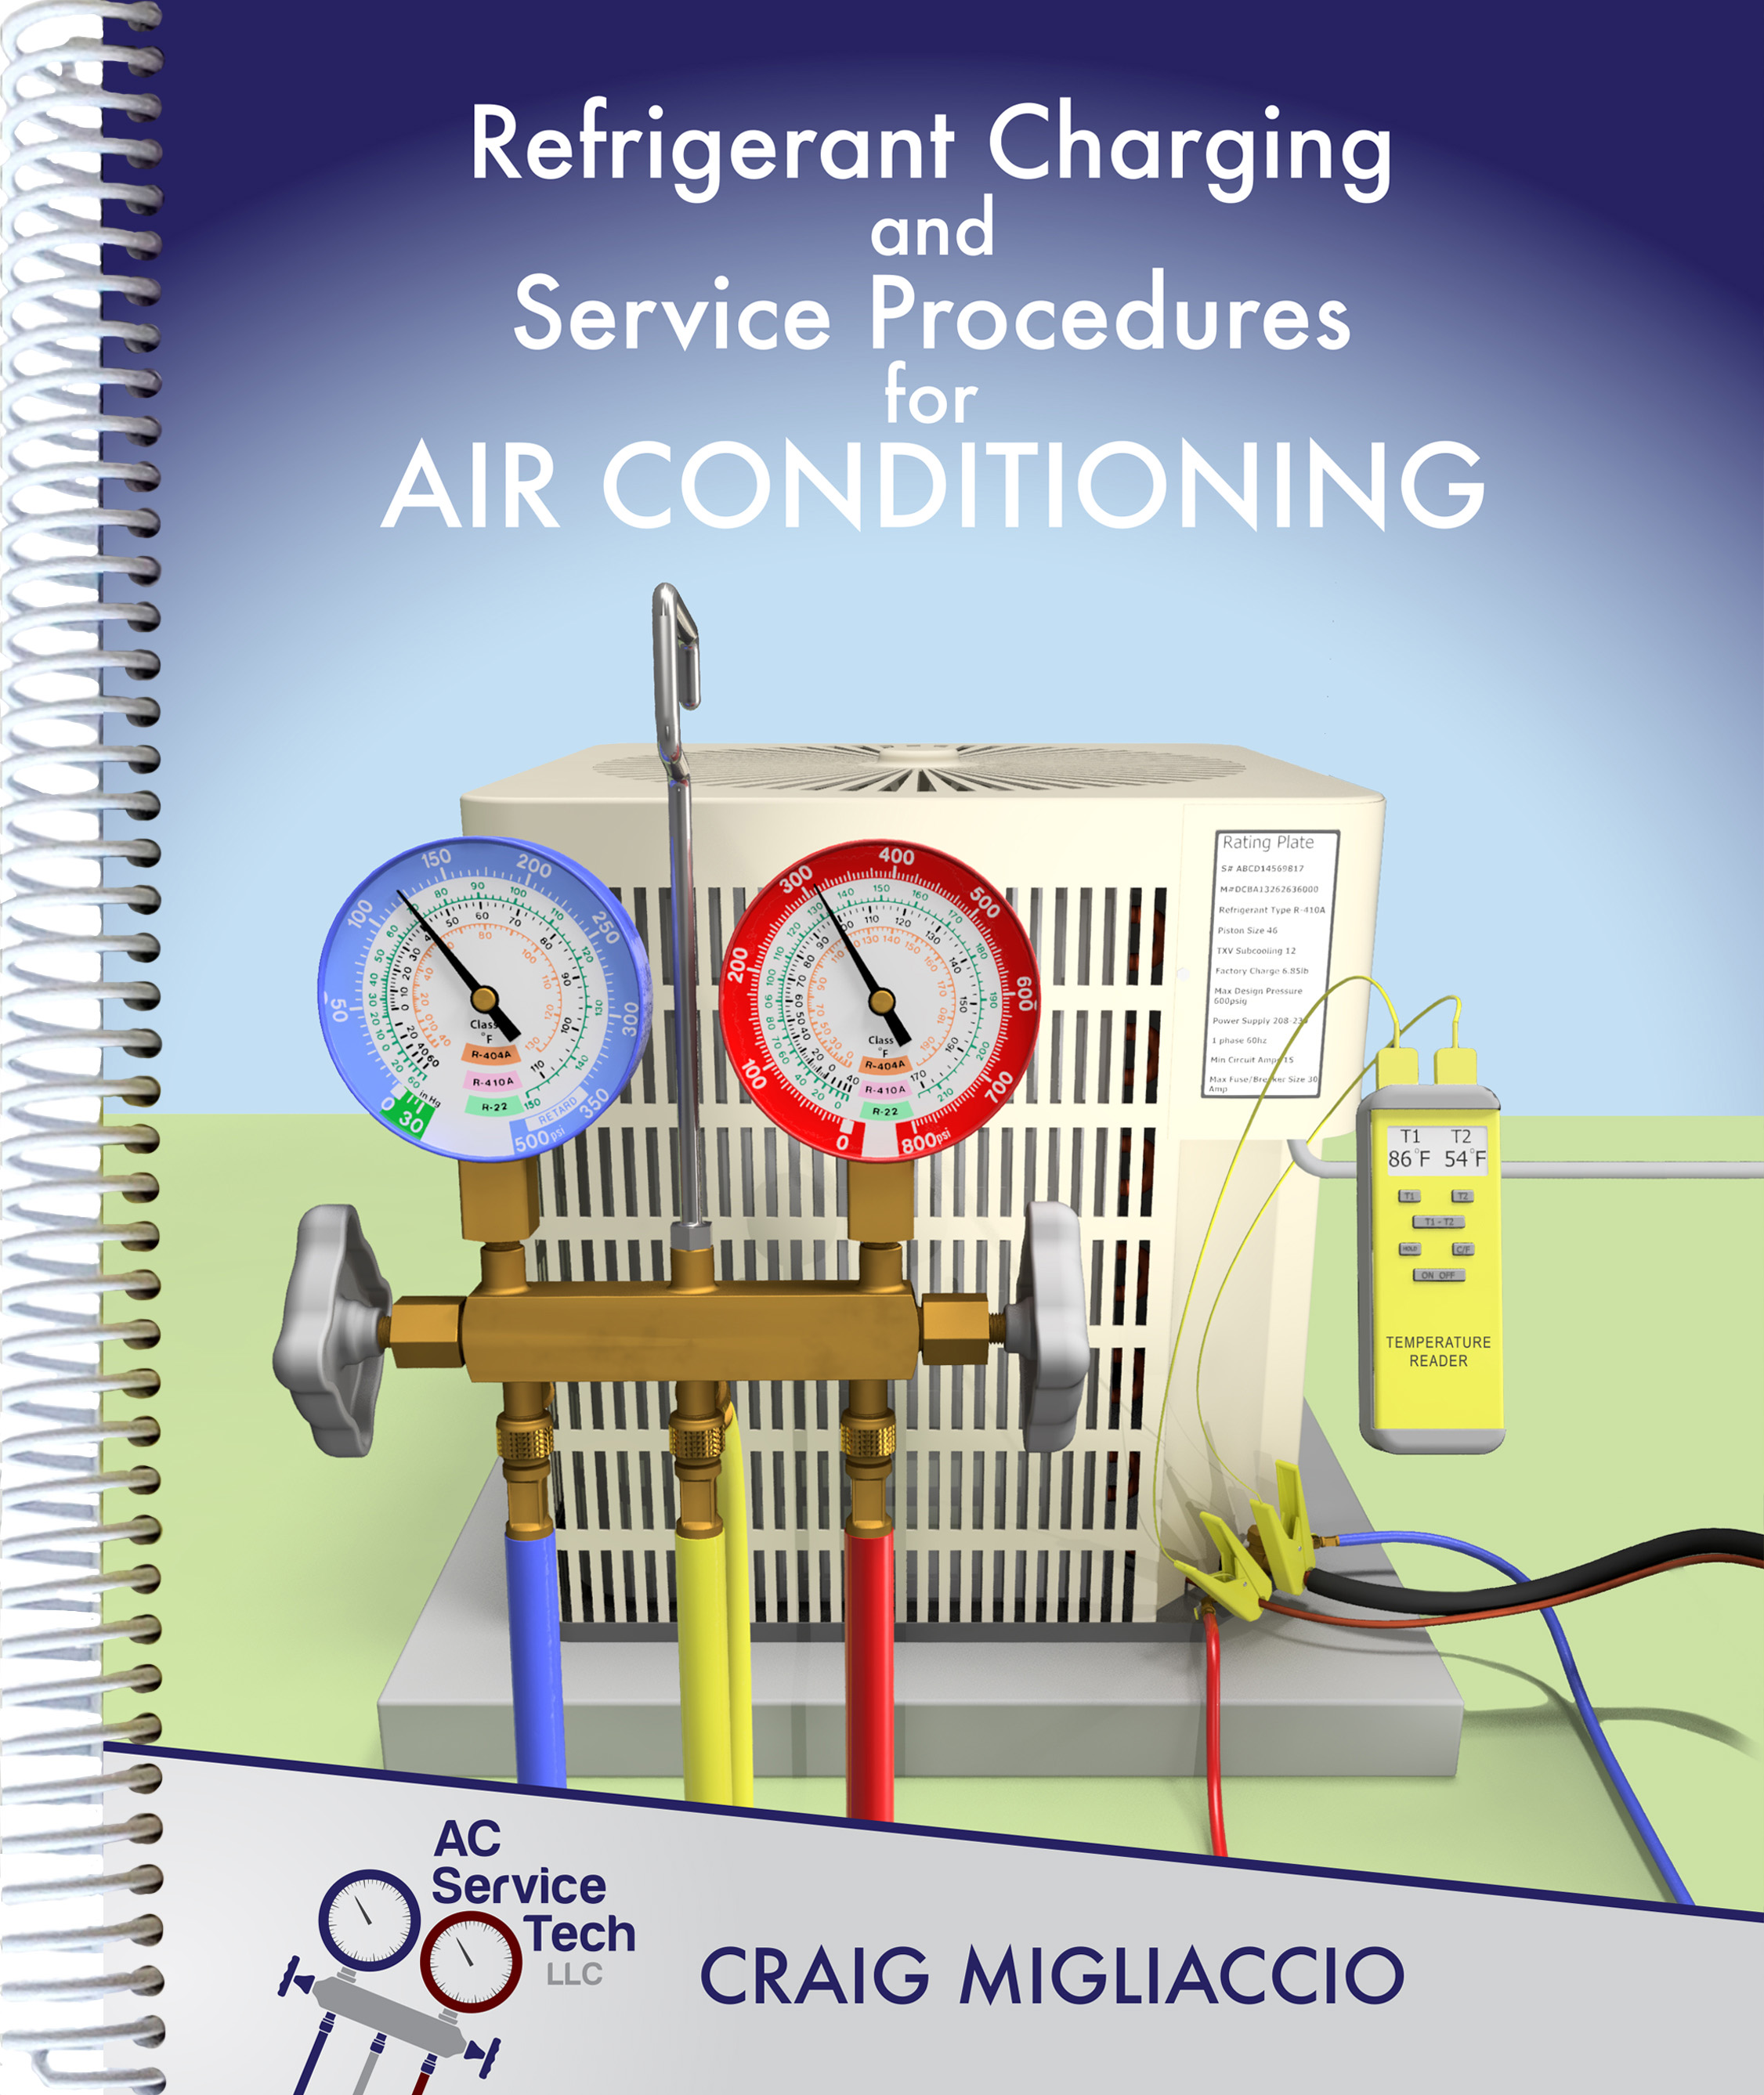 Refrigerant Charging and Service Procedures for Air Conditioning